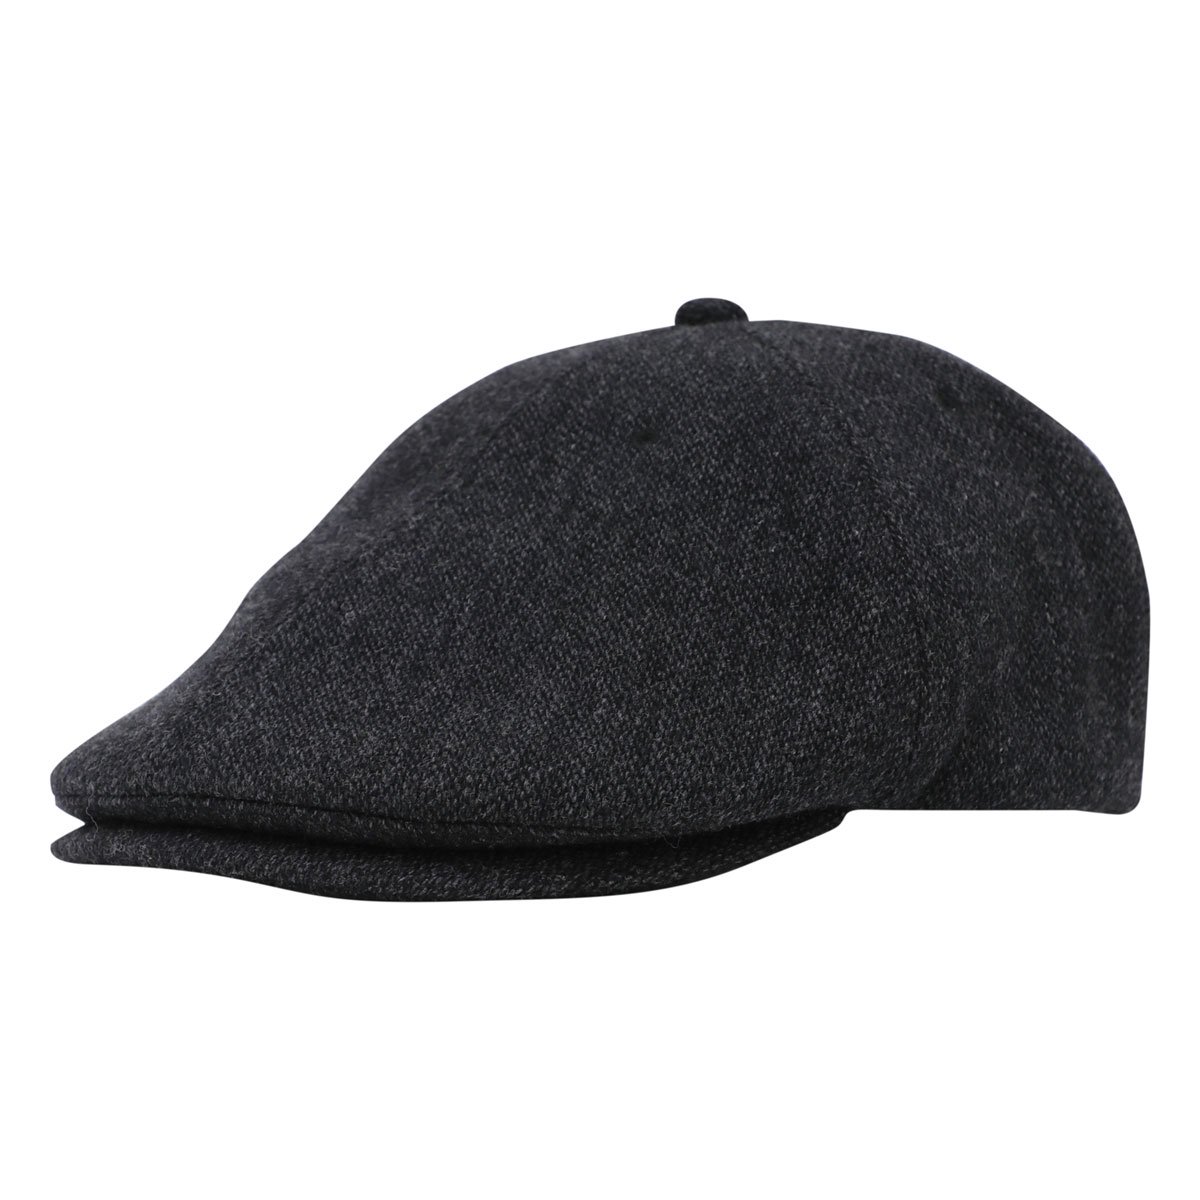 WHIMSY - WOOL SNAP BACK HUNTING - SHRED